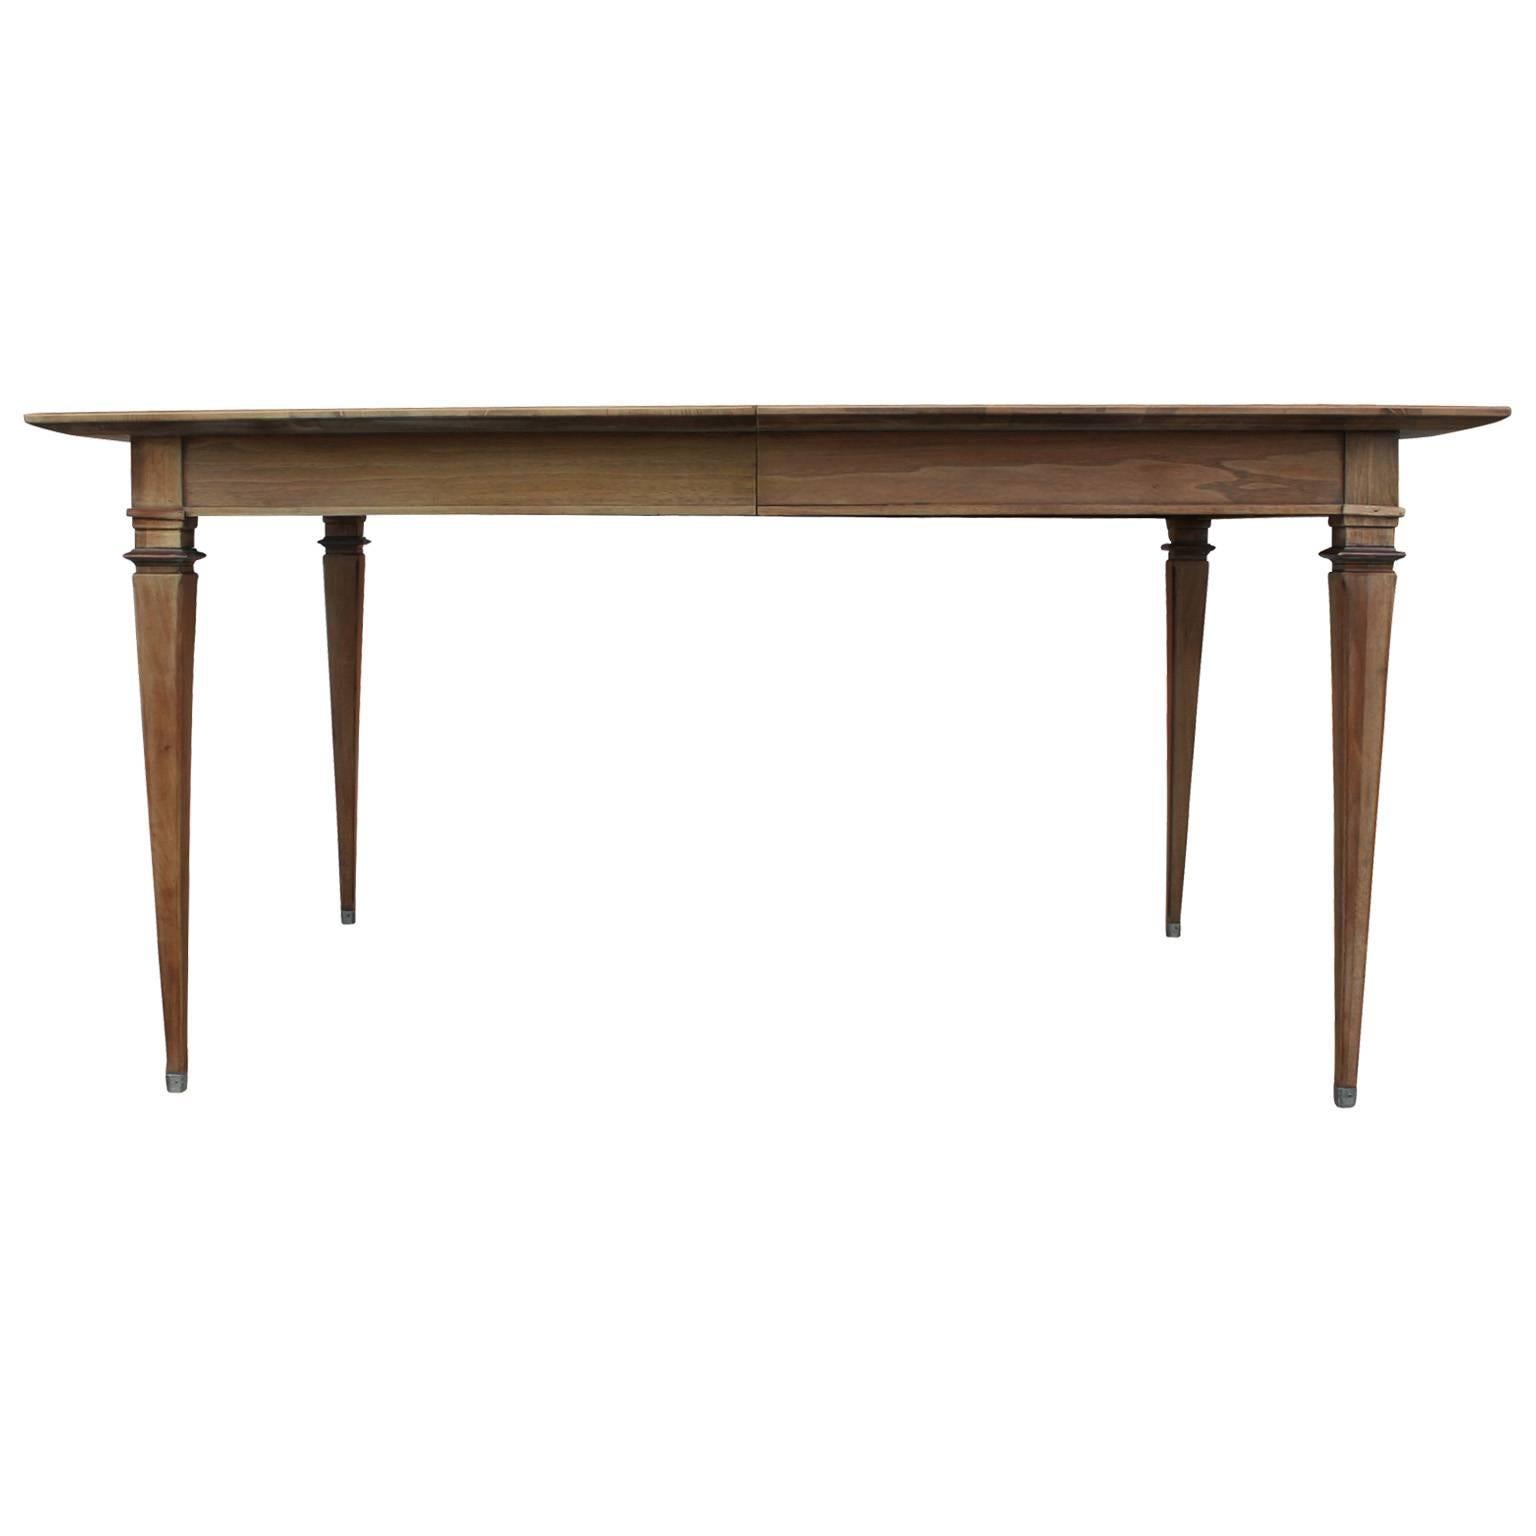 American Modern Burl Parquetry Dining Table by Bernhard Rohne for Mastercraft